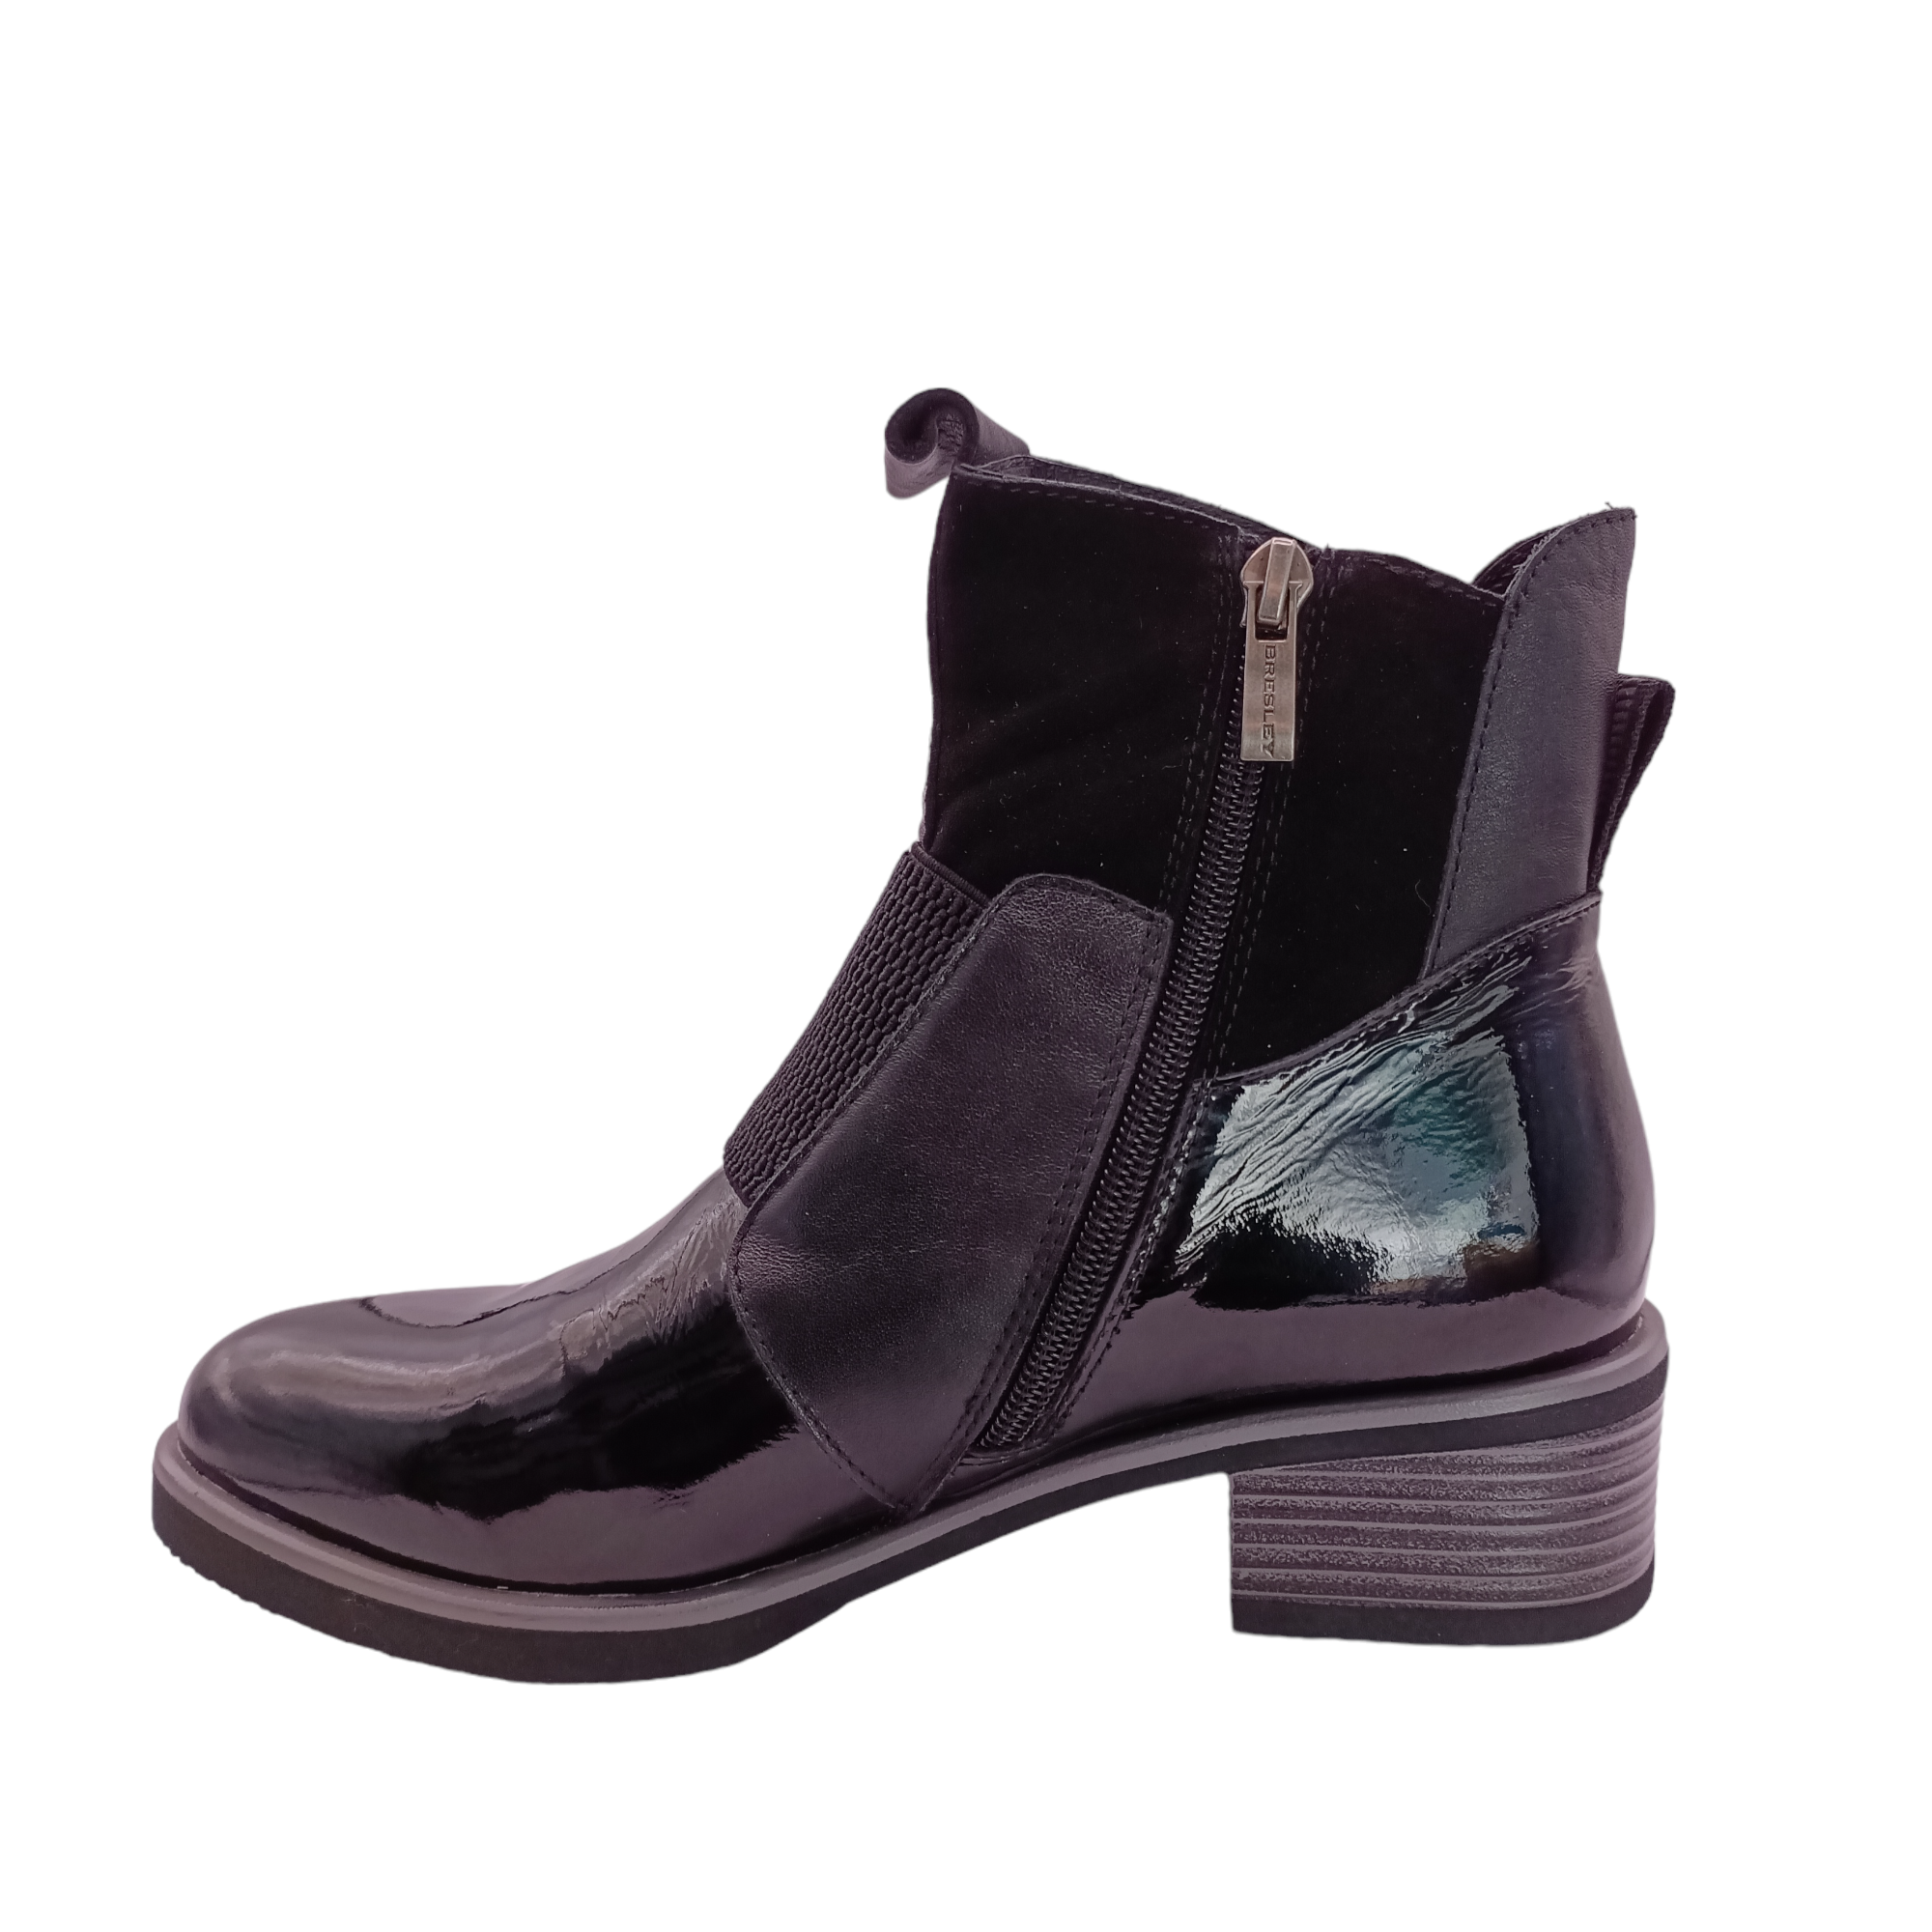 Shop Dread boot from Bresley. Inner side view of Black patent leather on the toe and the back heel. suede pieces of leather around the boot. side zip and a gusset over the front. shoe&amp;me Mount Maunganui